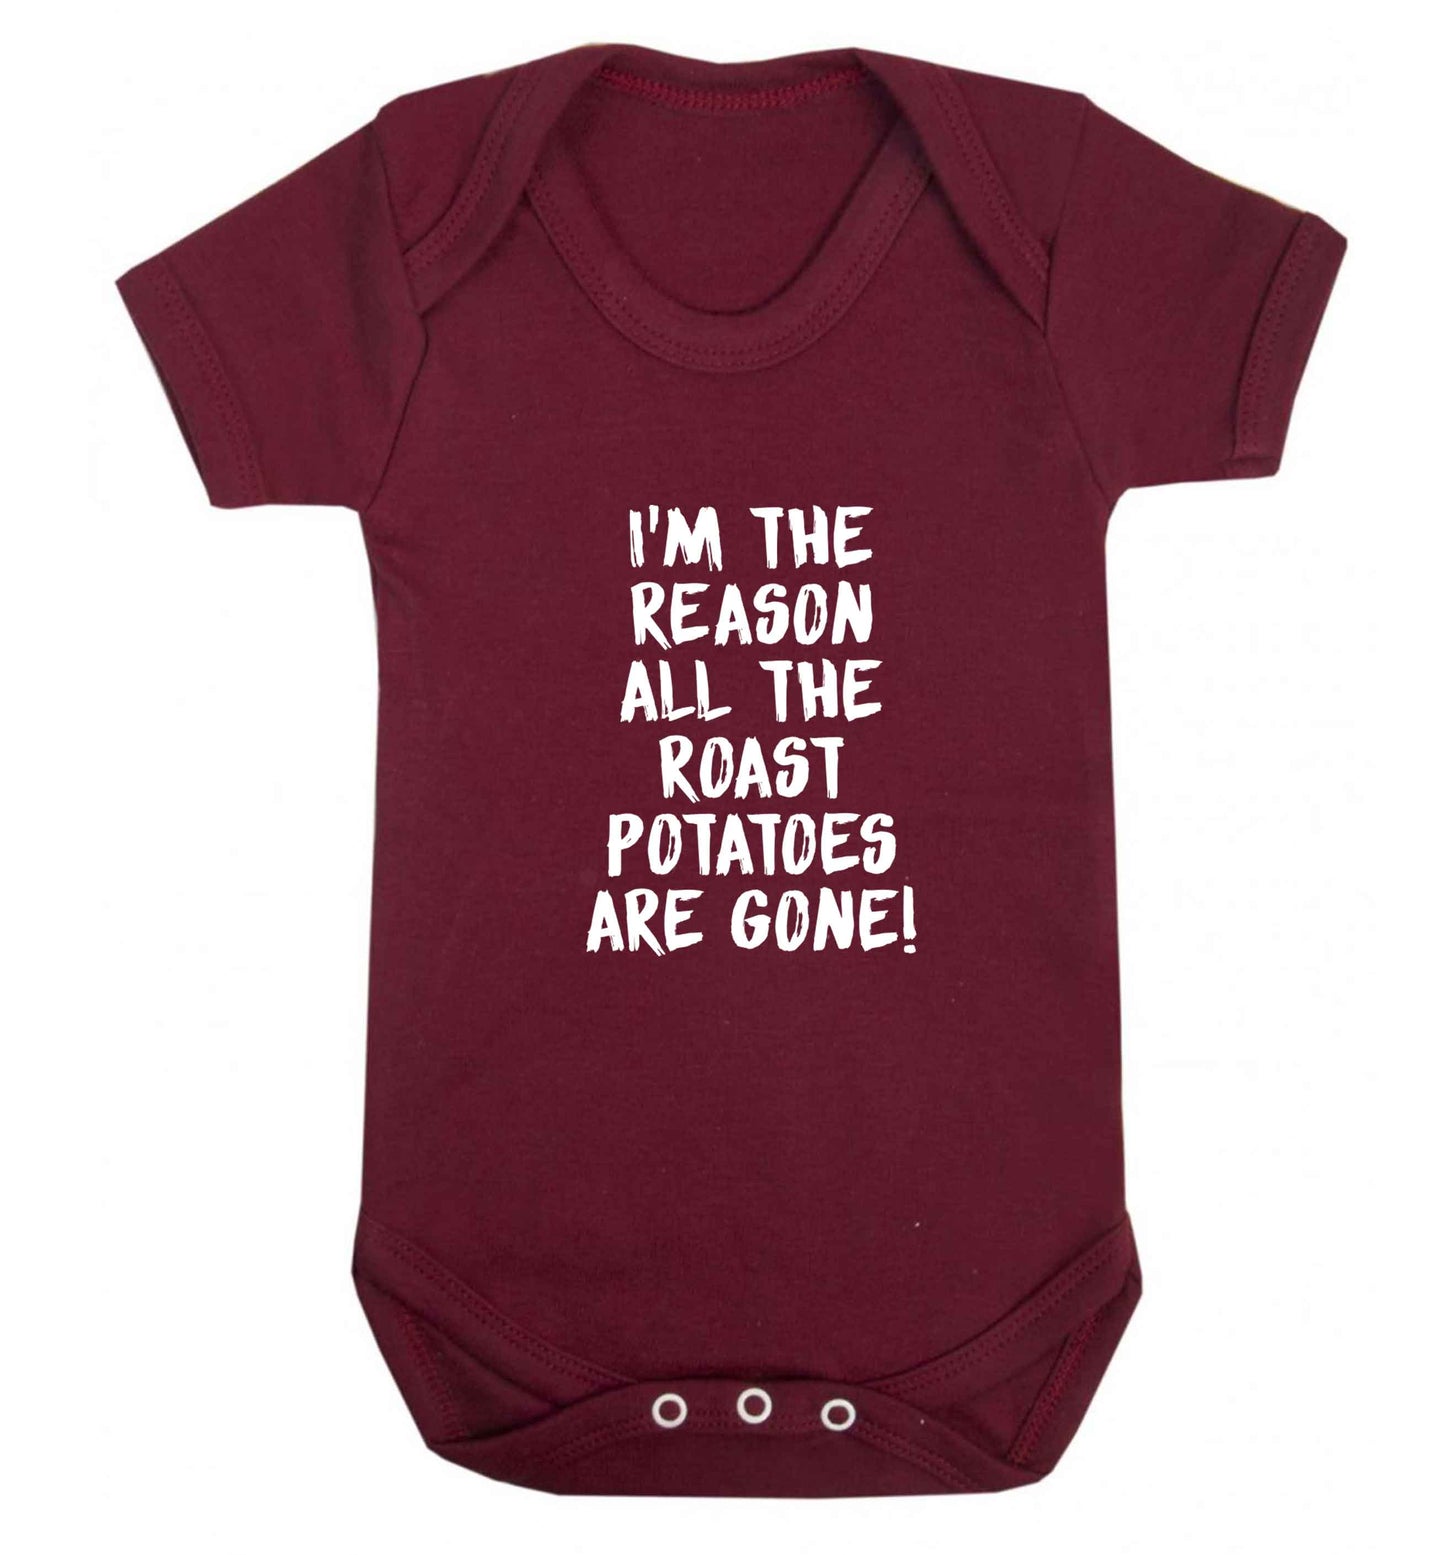 I'm the reason all the roast potatoes are gone baby vest maroon 18-24 months